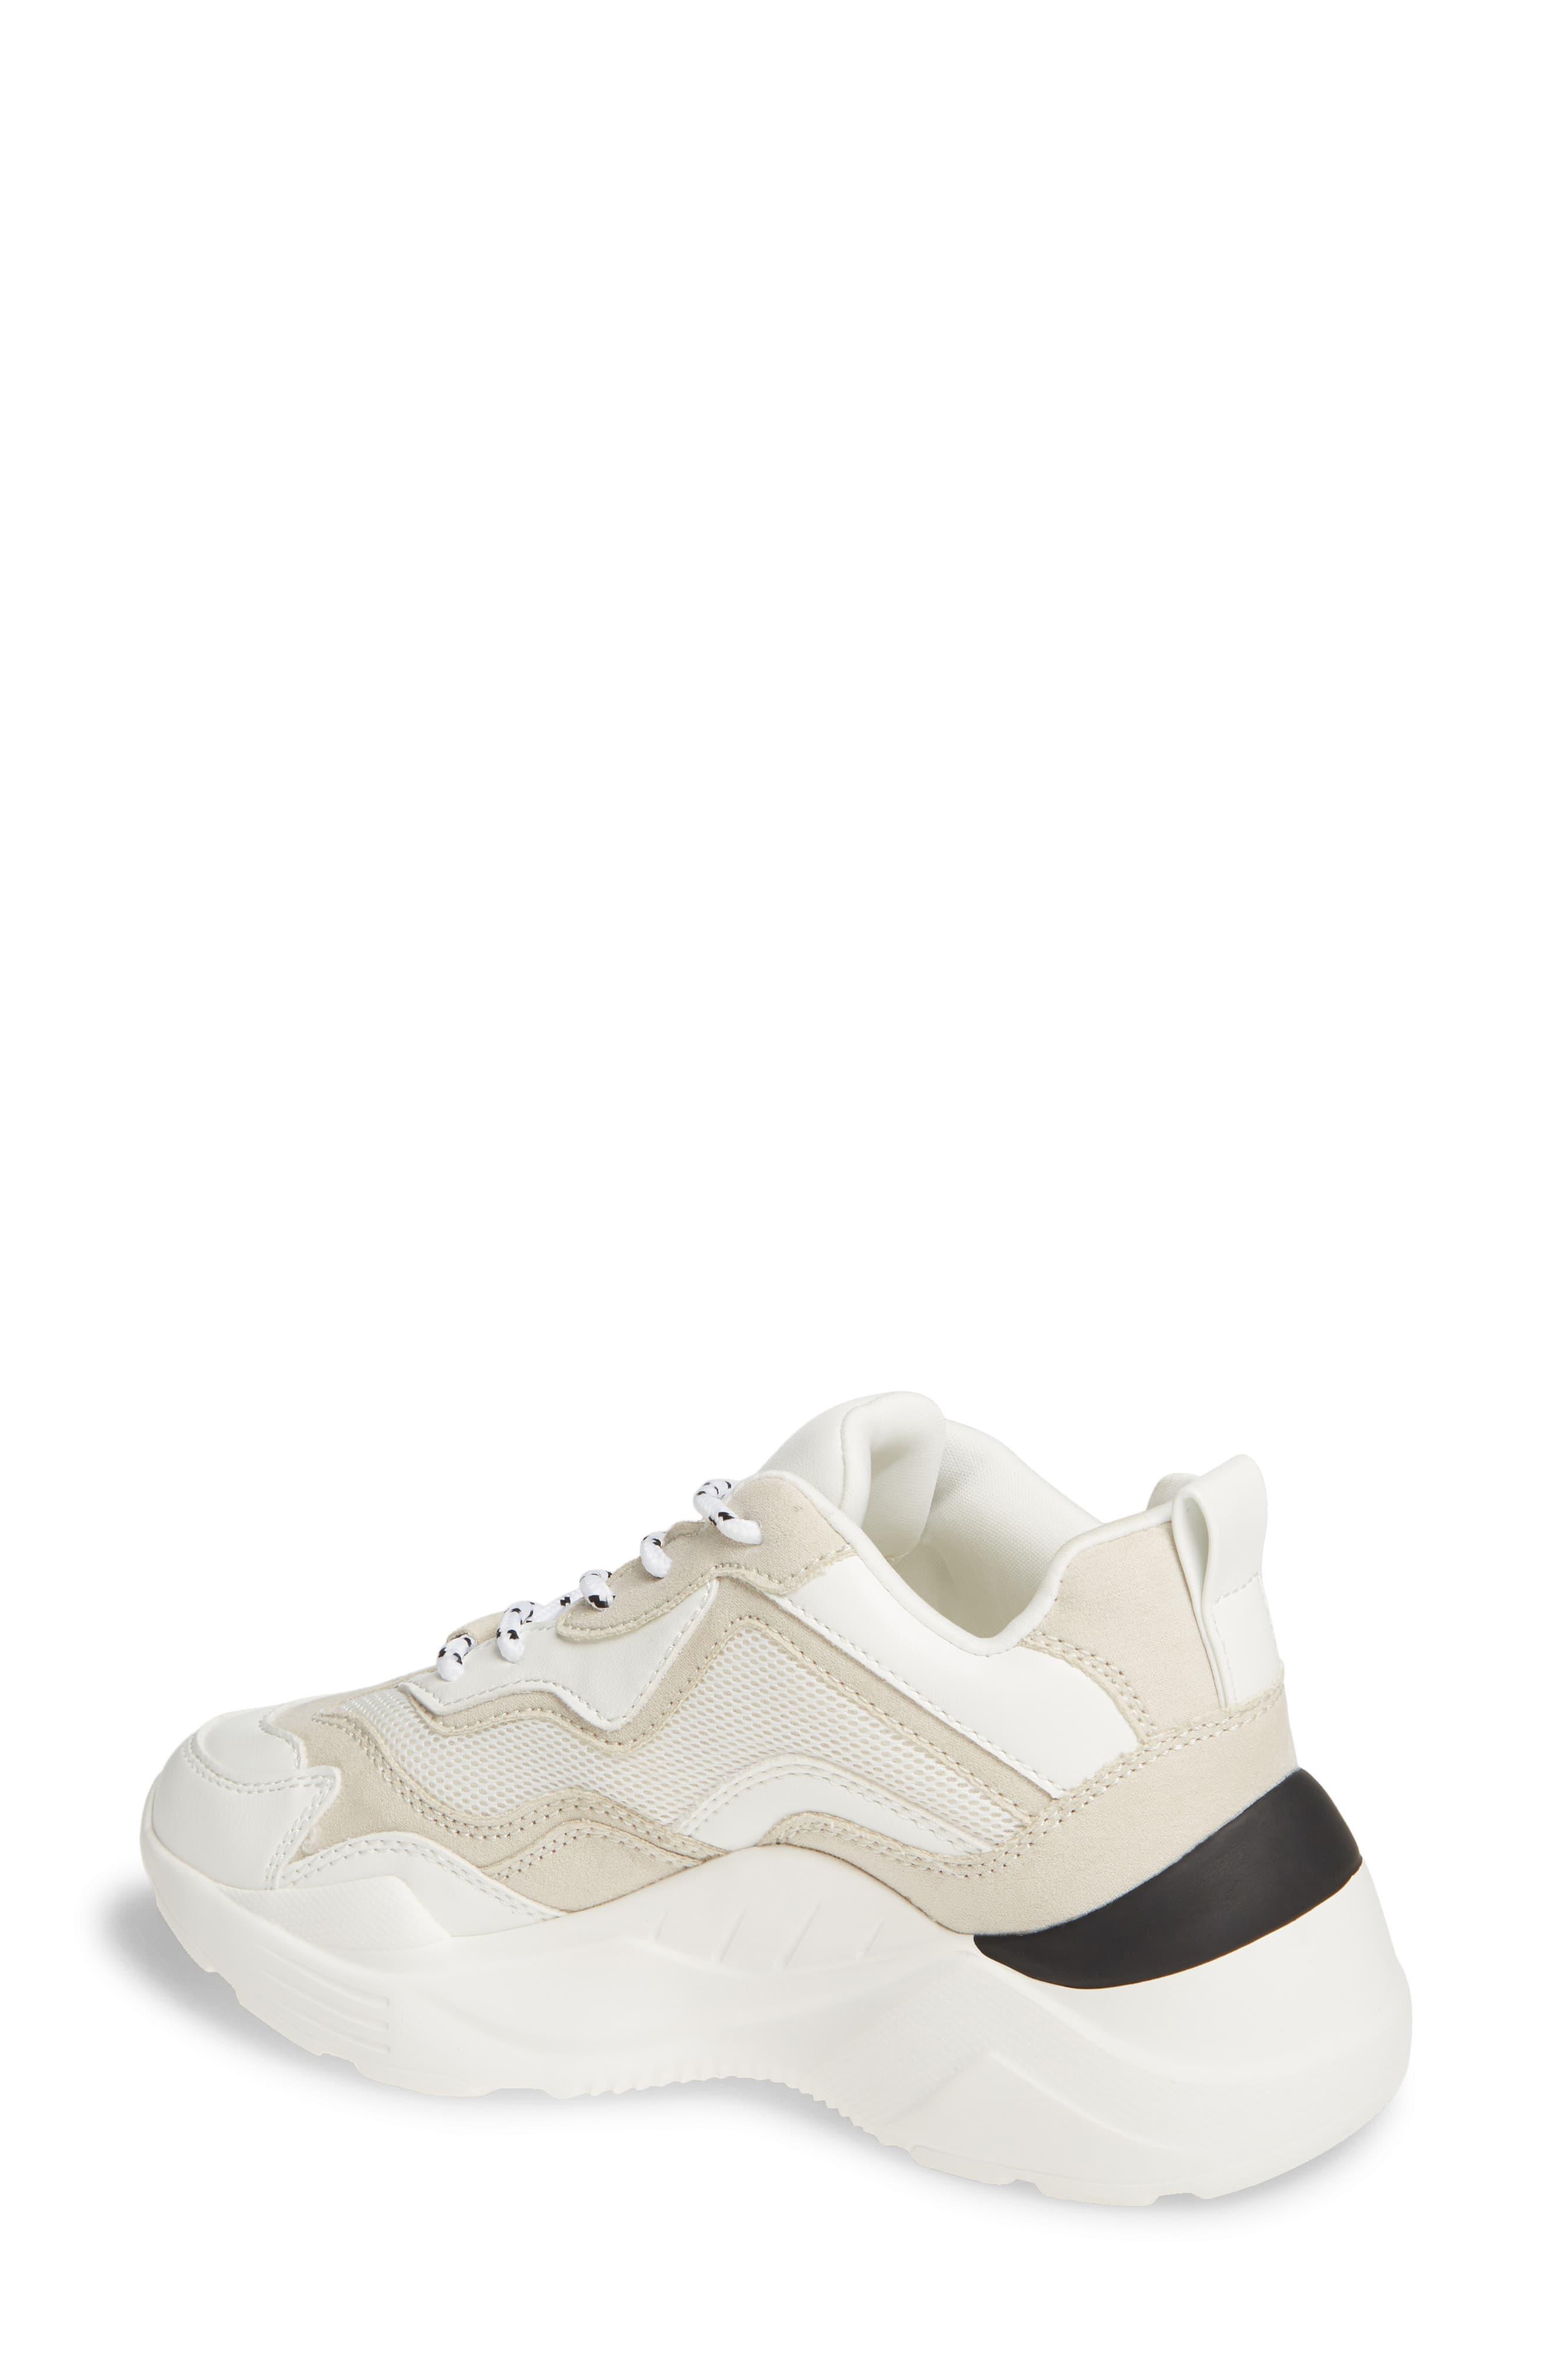 TOPSHOP Cancun Chunky Sneakers in Cream (White) | Lyst